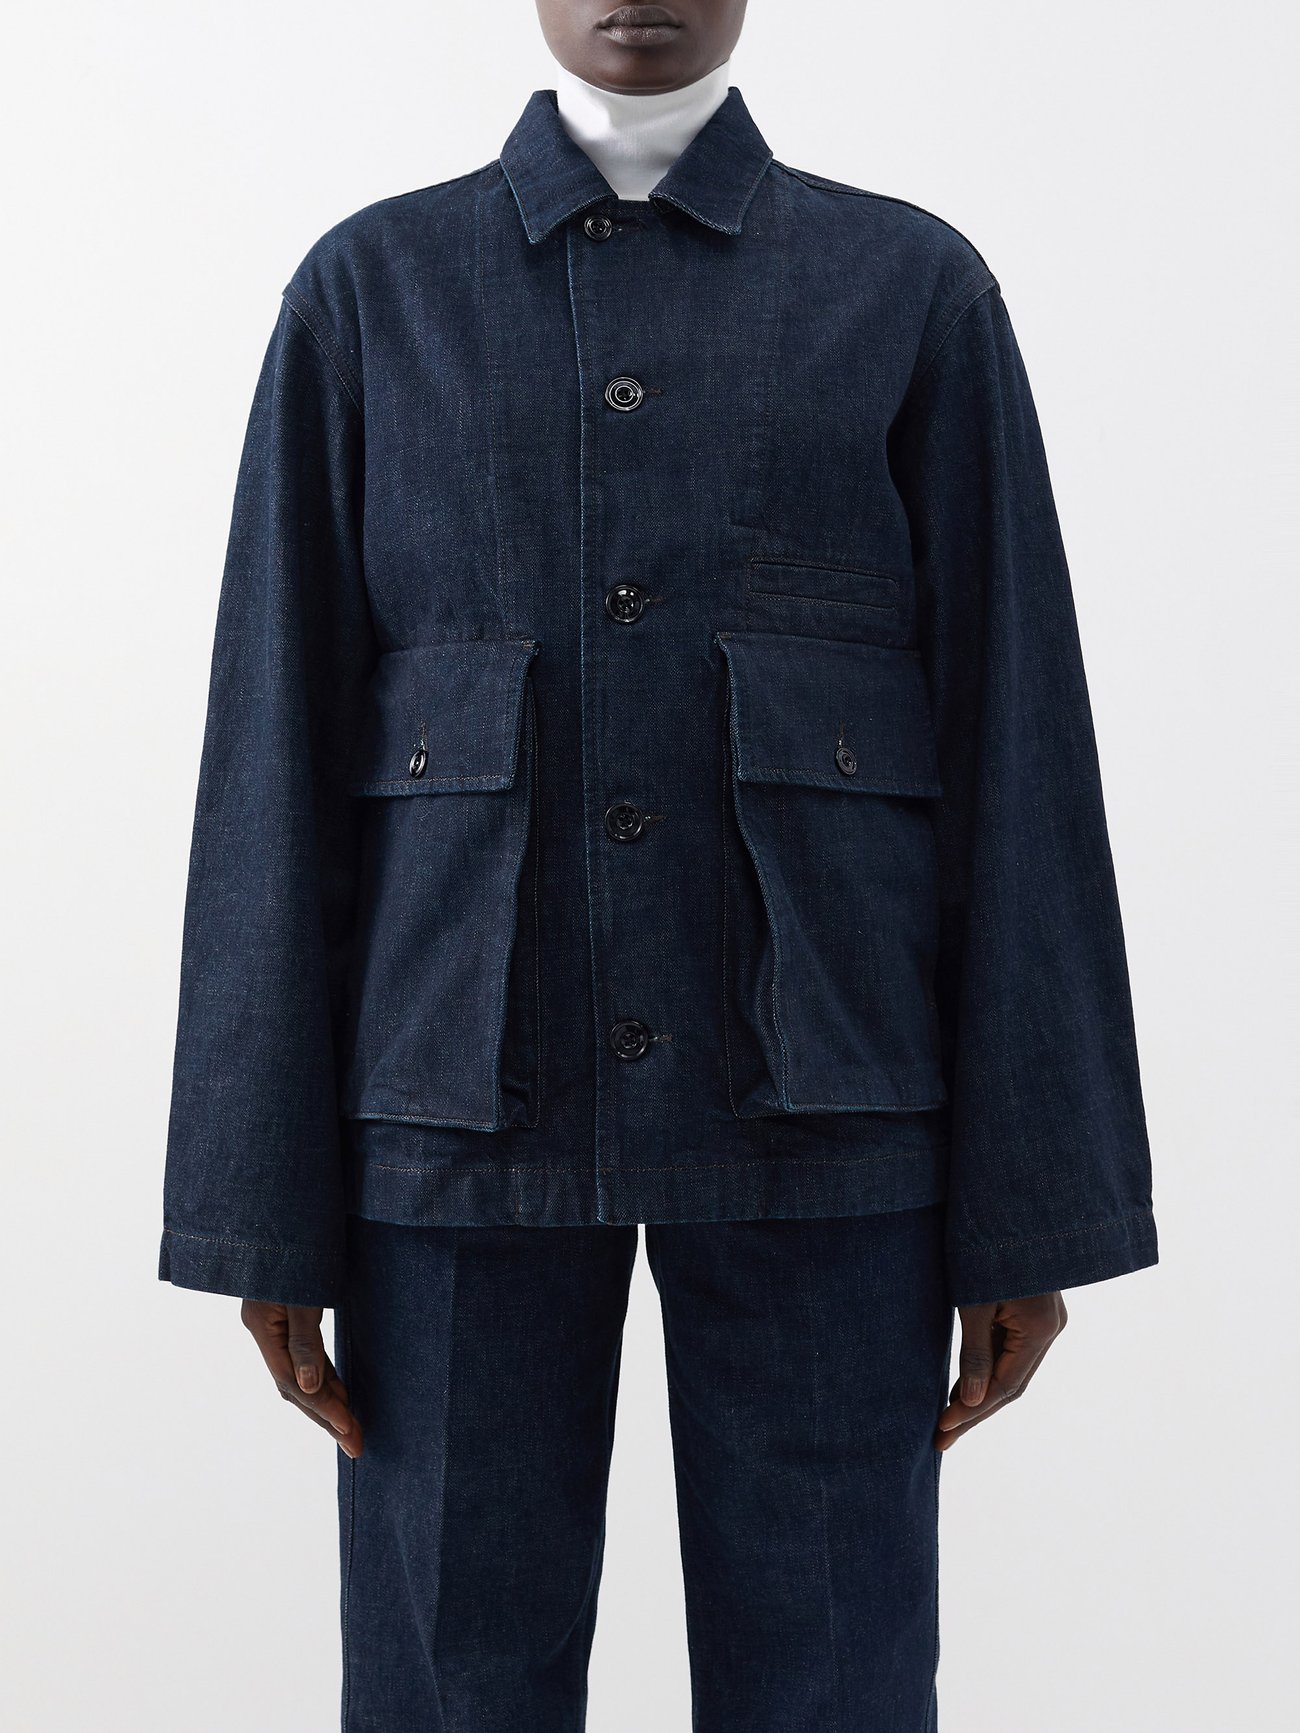 Lemaire's playful approach to proportion is referenced in this navy jacket, cut from crisp denim and defined by oversized flap pockets and a boxy fit.